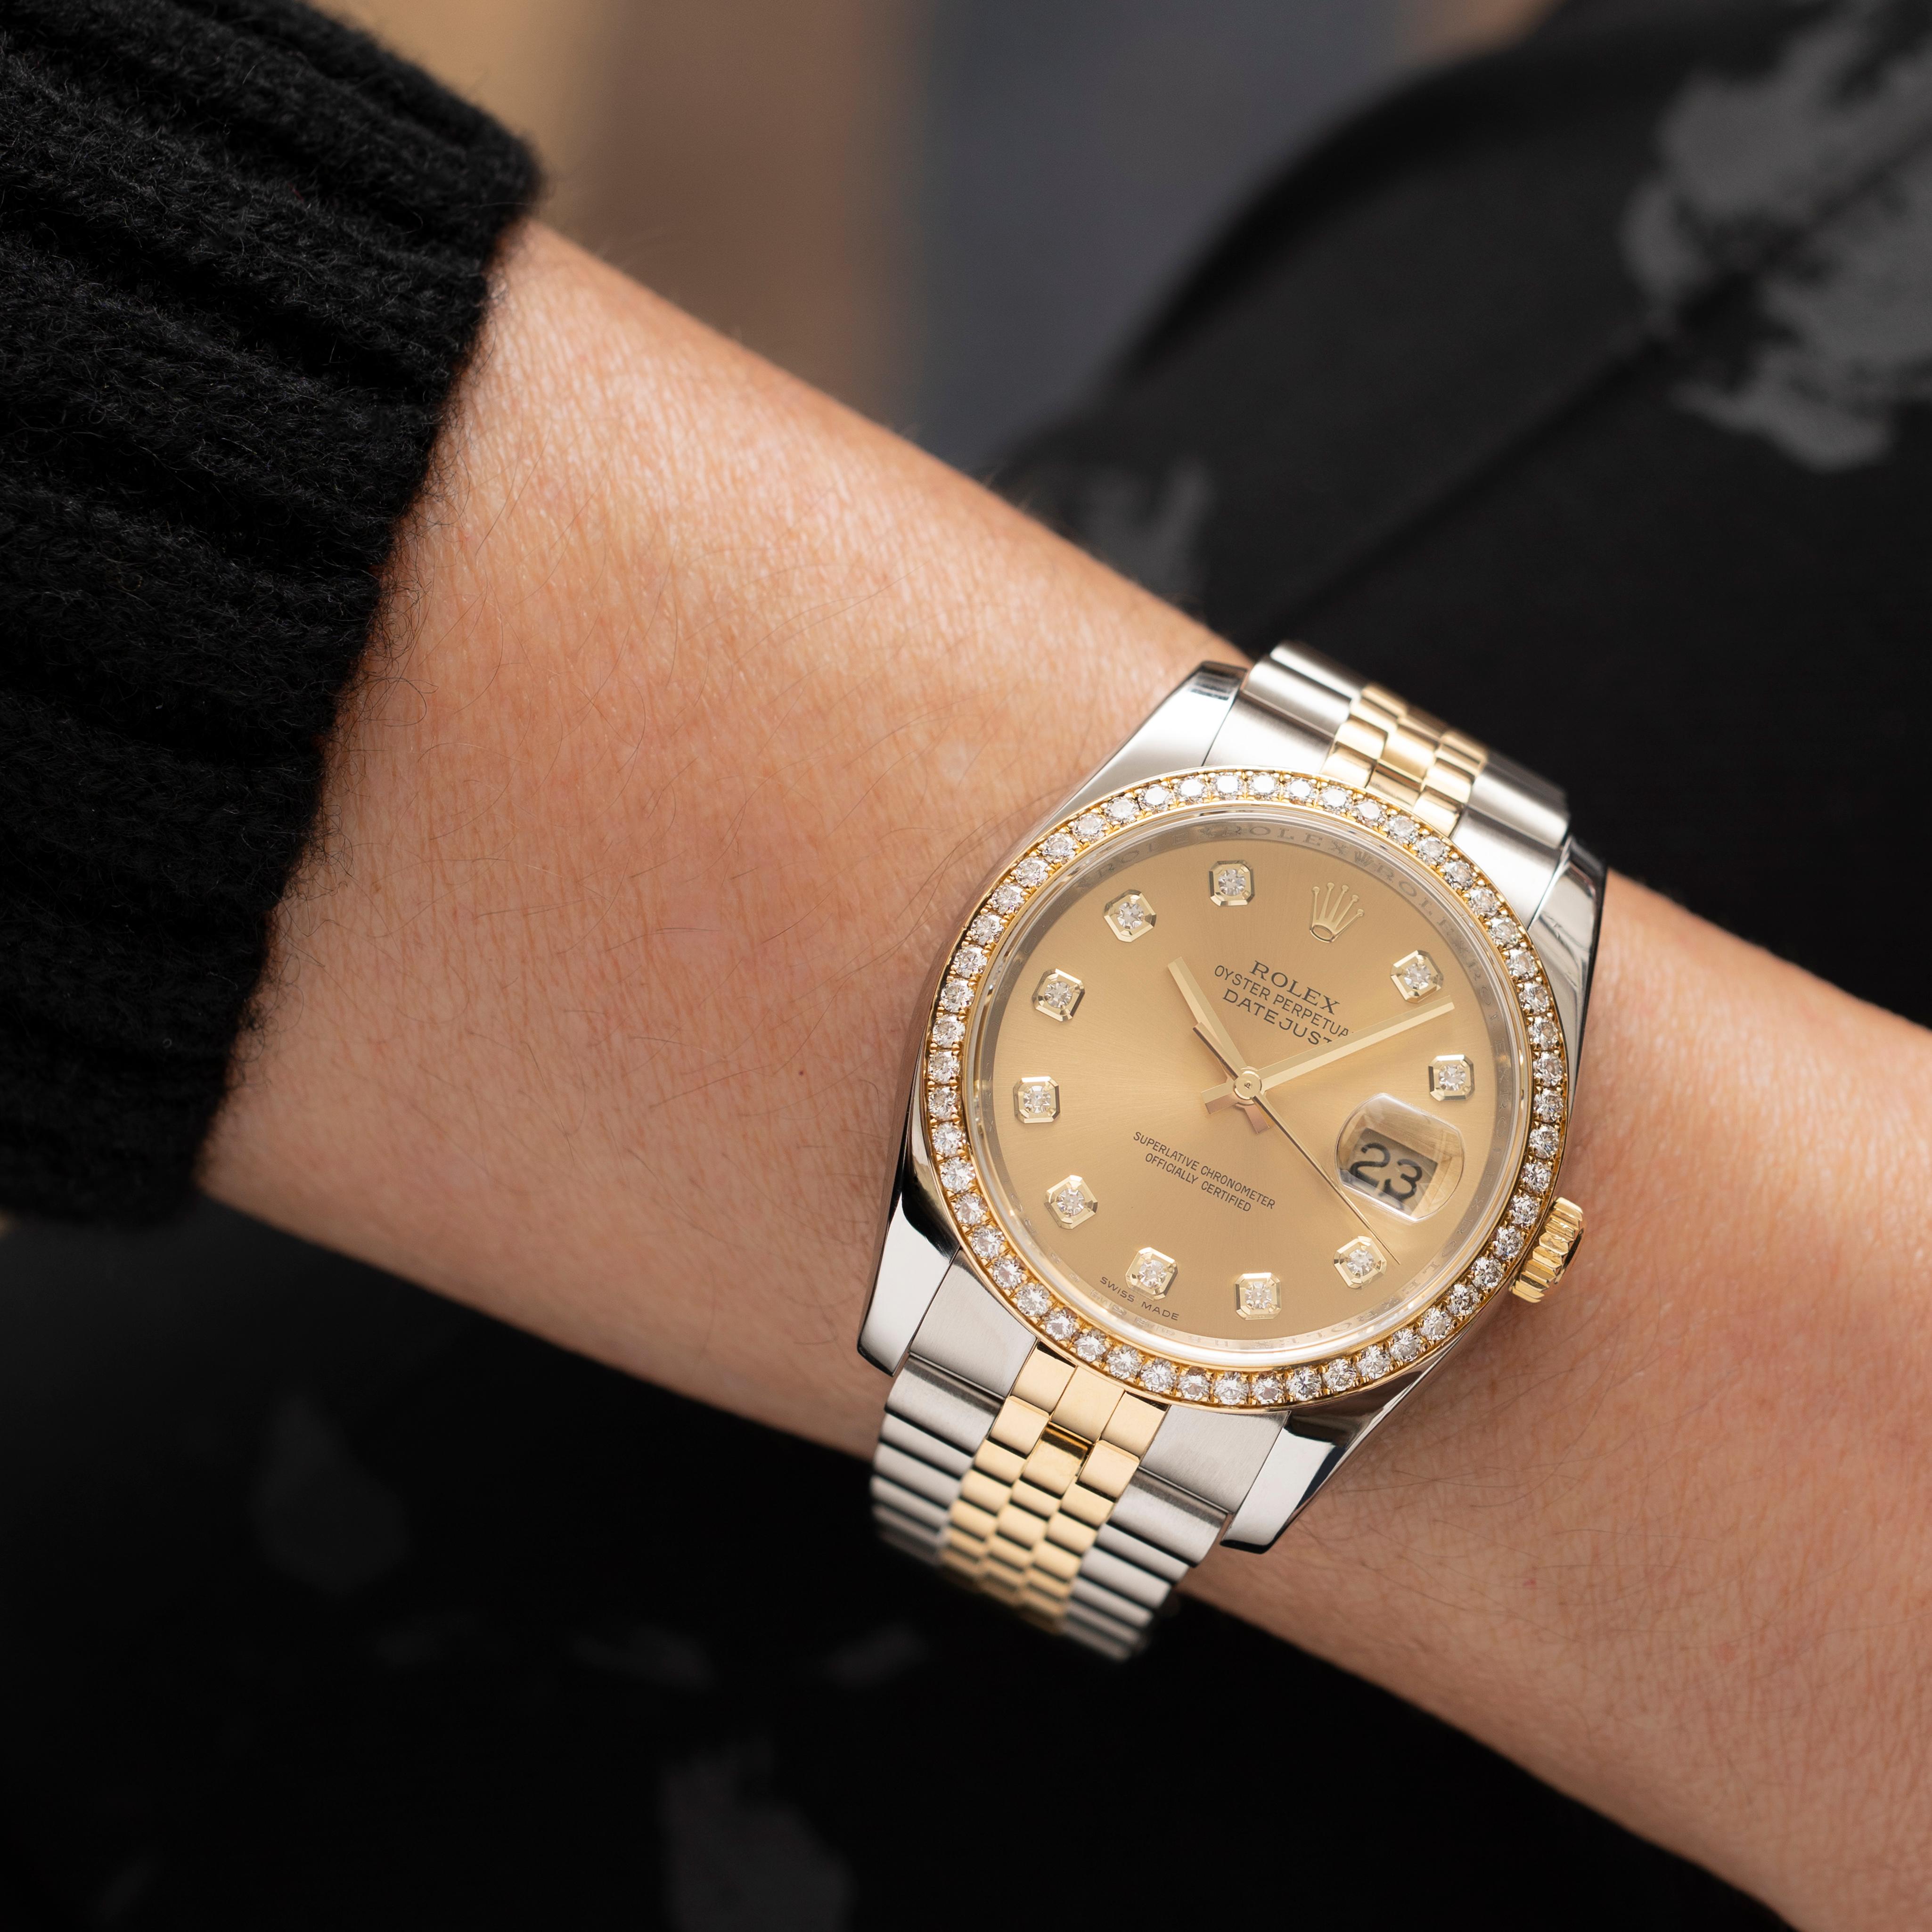 Modern 2014 Rolex DateJust Stainless Steel 18K Gold and Diamonds Model 116243 Papers For Sale